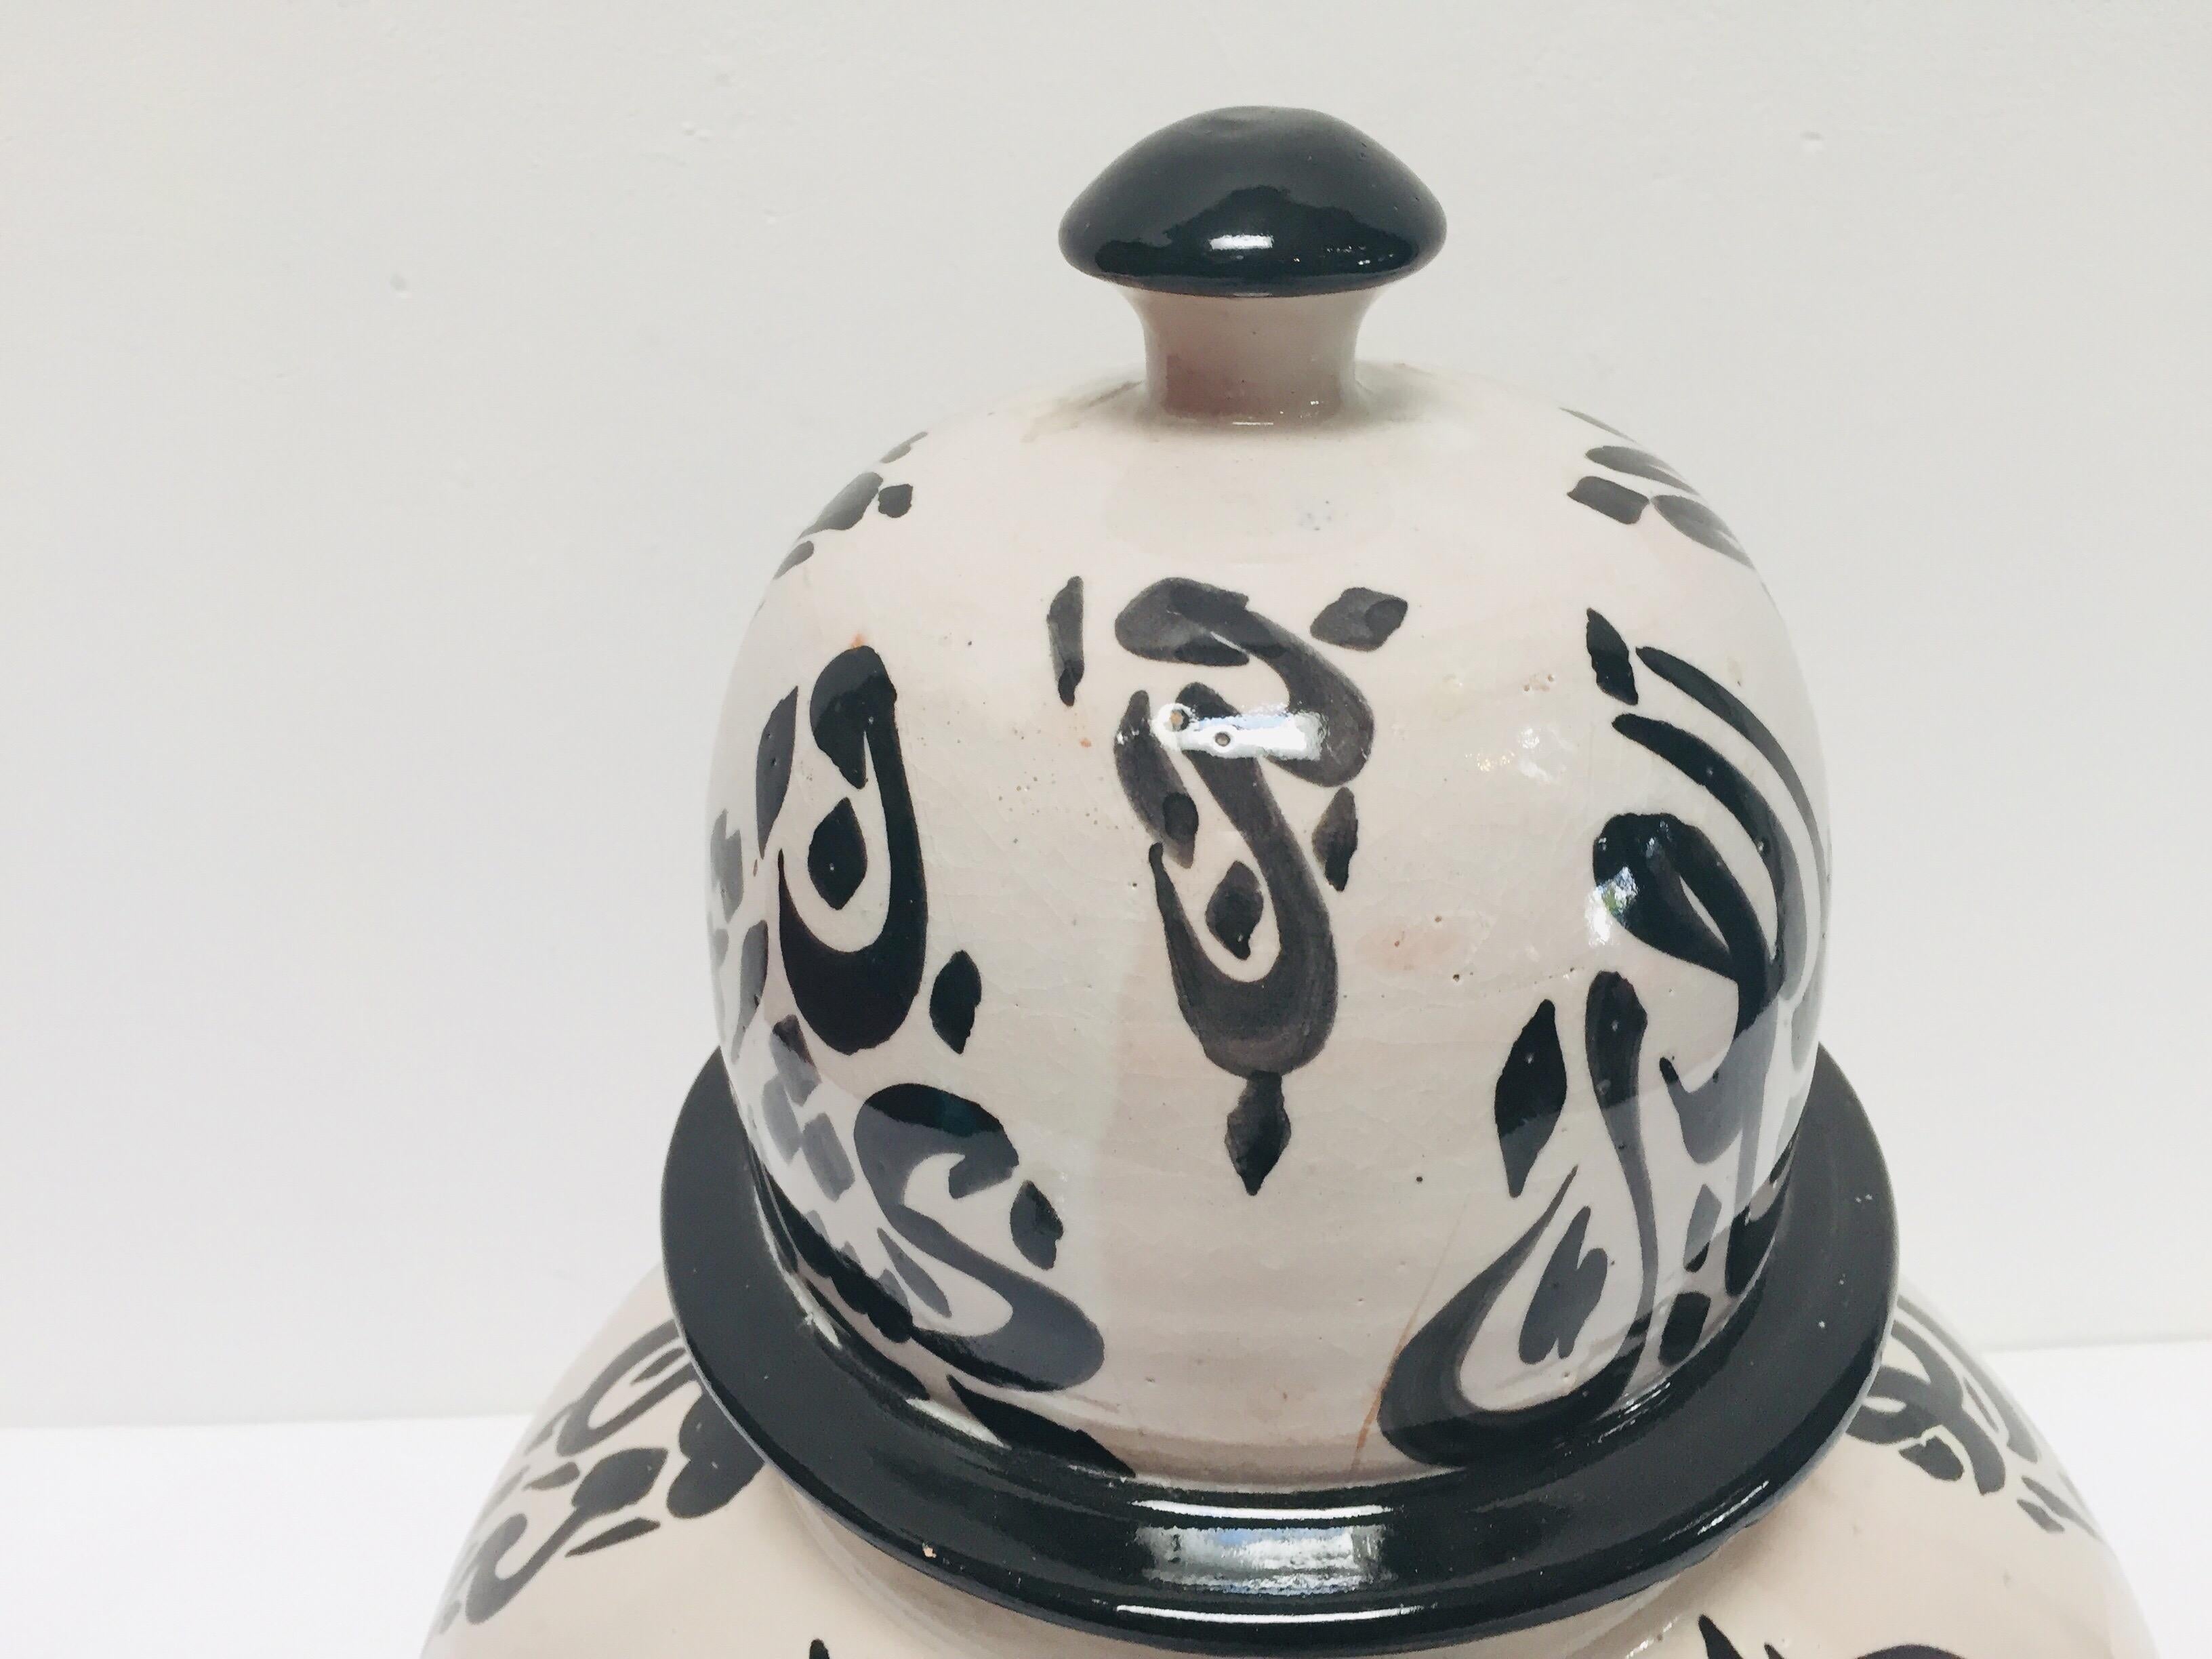 Hand-Crafted Moorish Ceramic Lidded Urn with Arabic Calligraphy Lettrism Black Writing For Sale